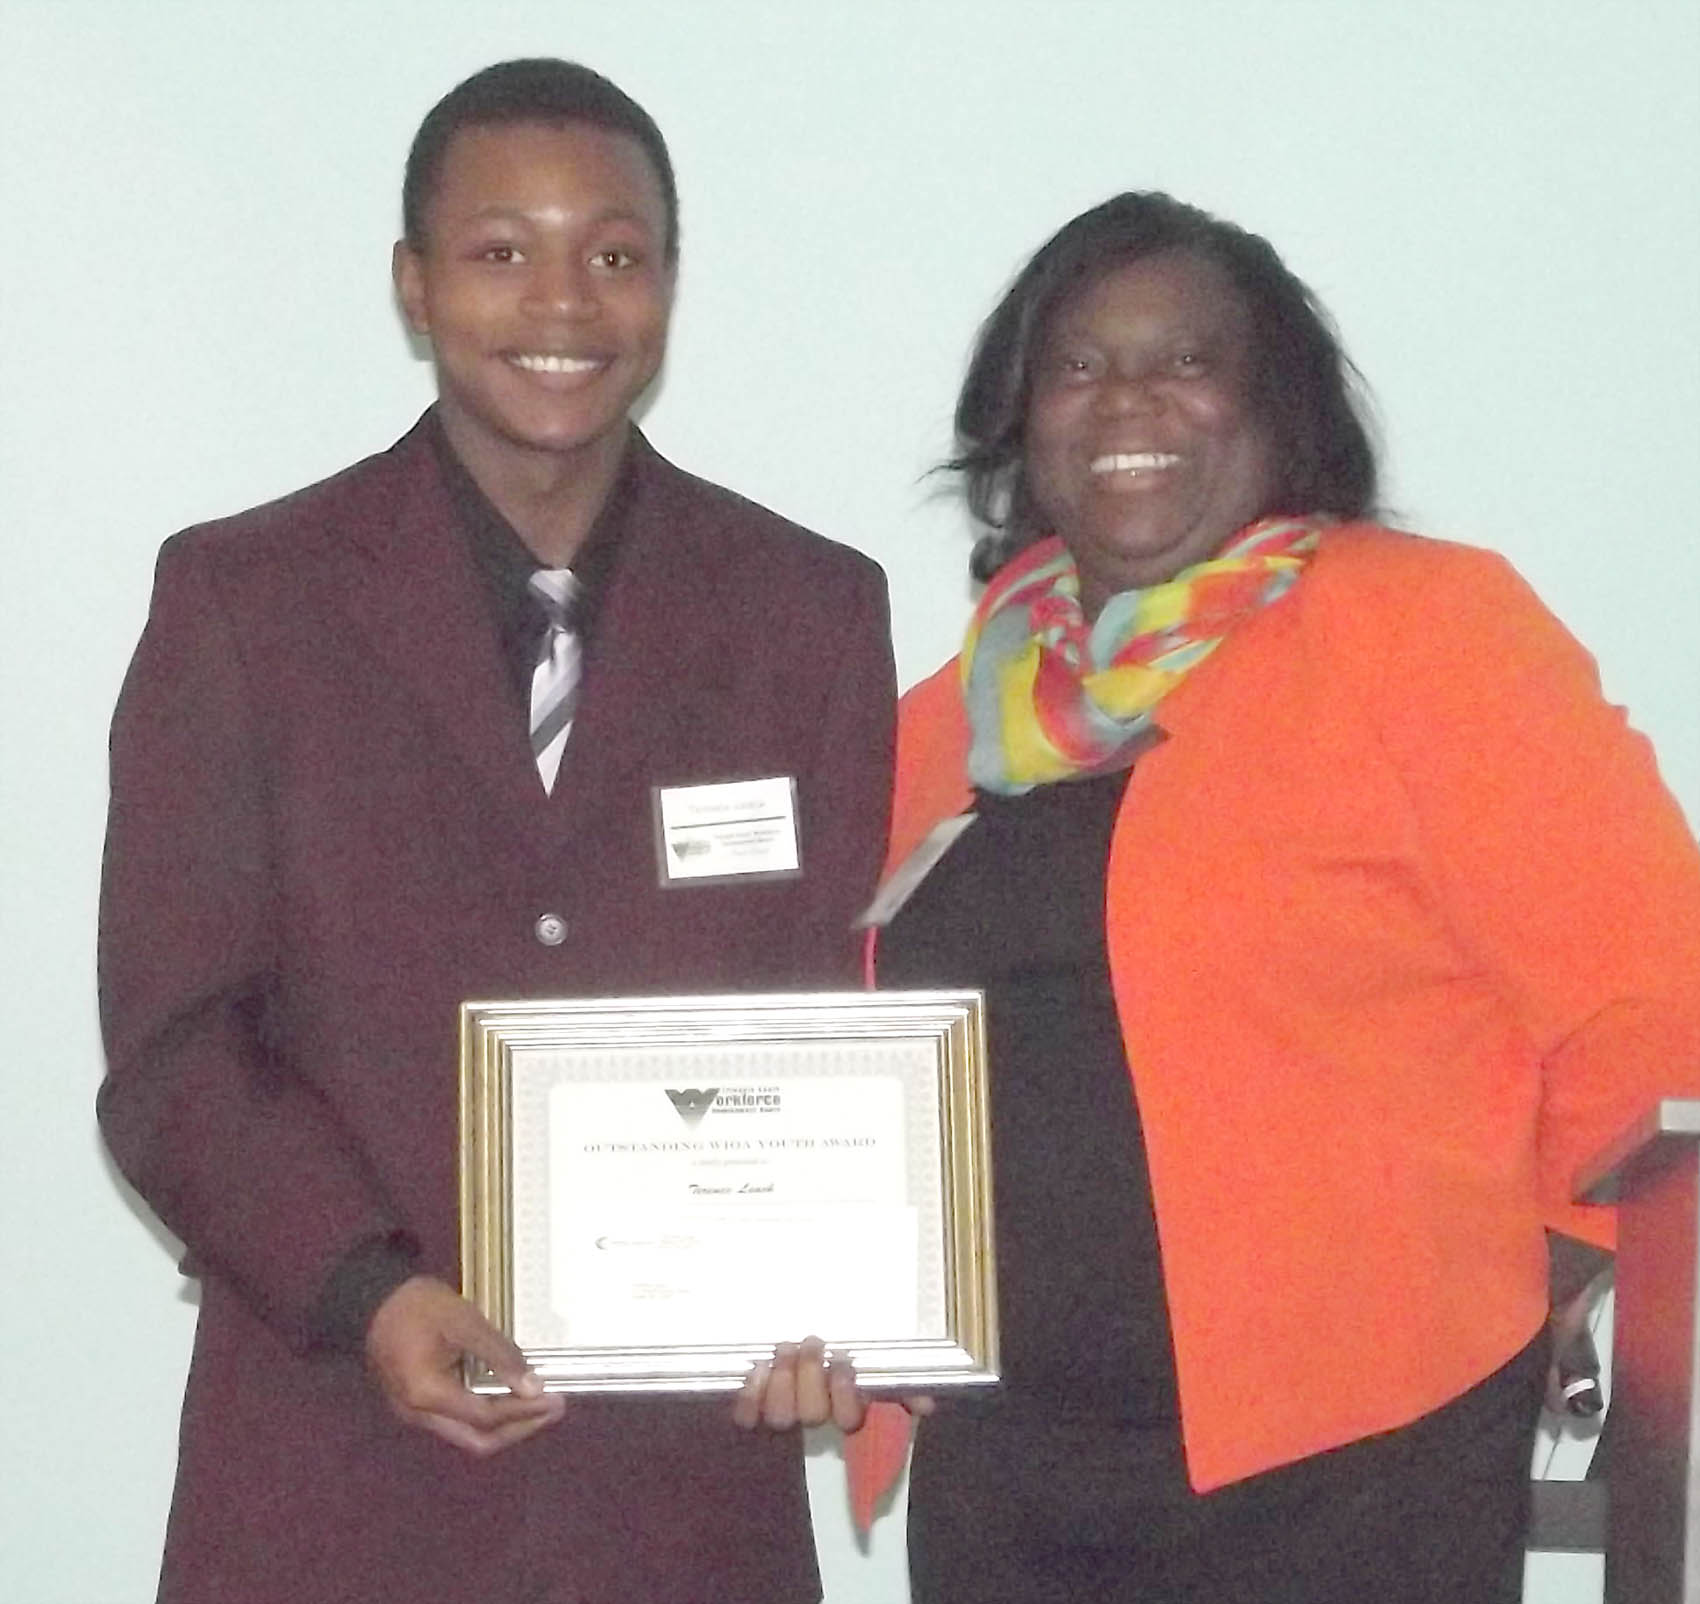 Click to enlarge,  Terence Leach, of Harnett County, received the Outstanding WIOA In-School Youth Award at the 7th Annual Triangle South Workforce Development Board (TSWDB) Awards Banquet held Wednesday, Dec. 5, at the Central Carolina Community College Harnett Health Sciences Center in Lillington. Presenting the award was Carolyn Blue, TSWDB Member. 